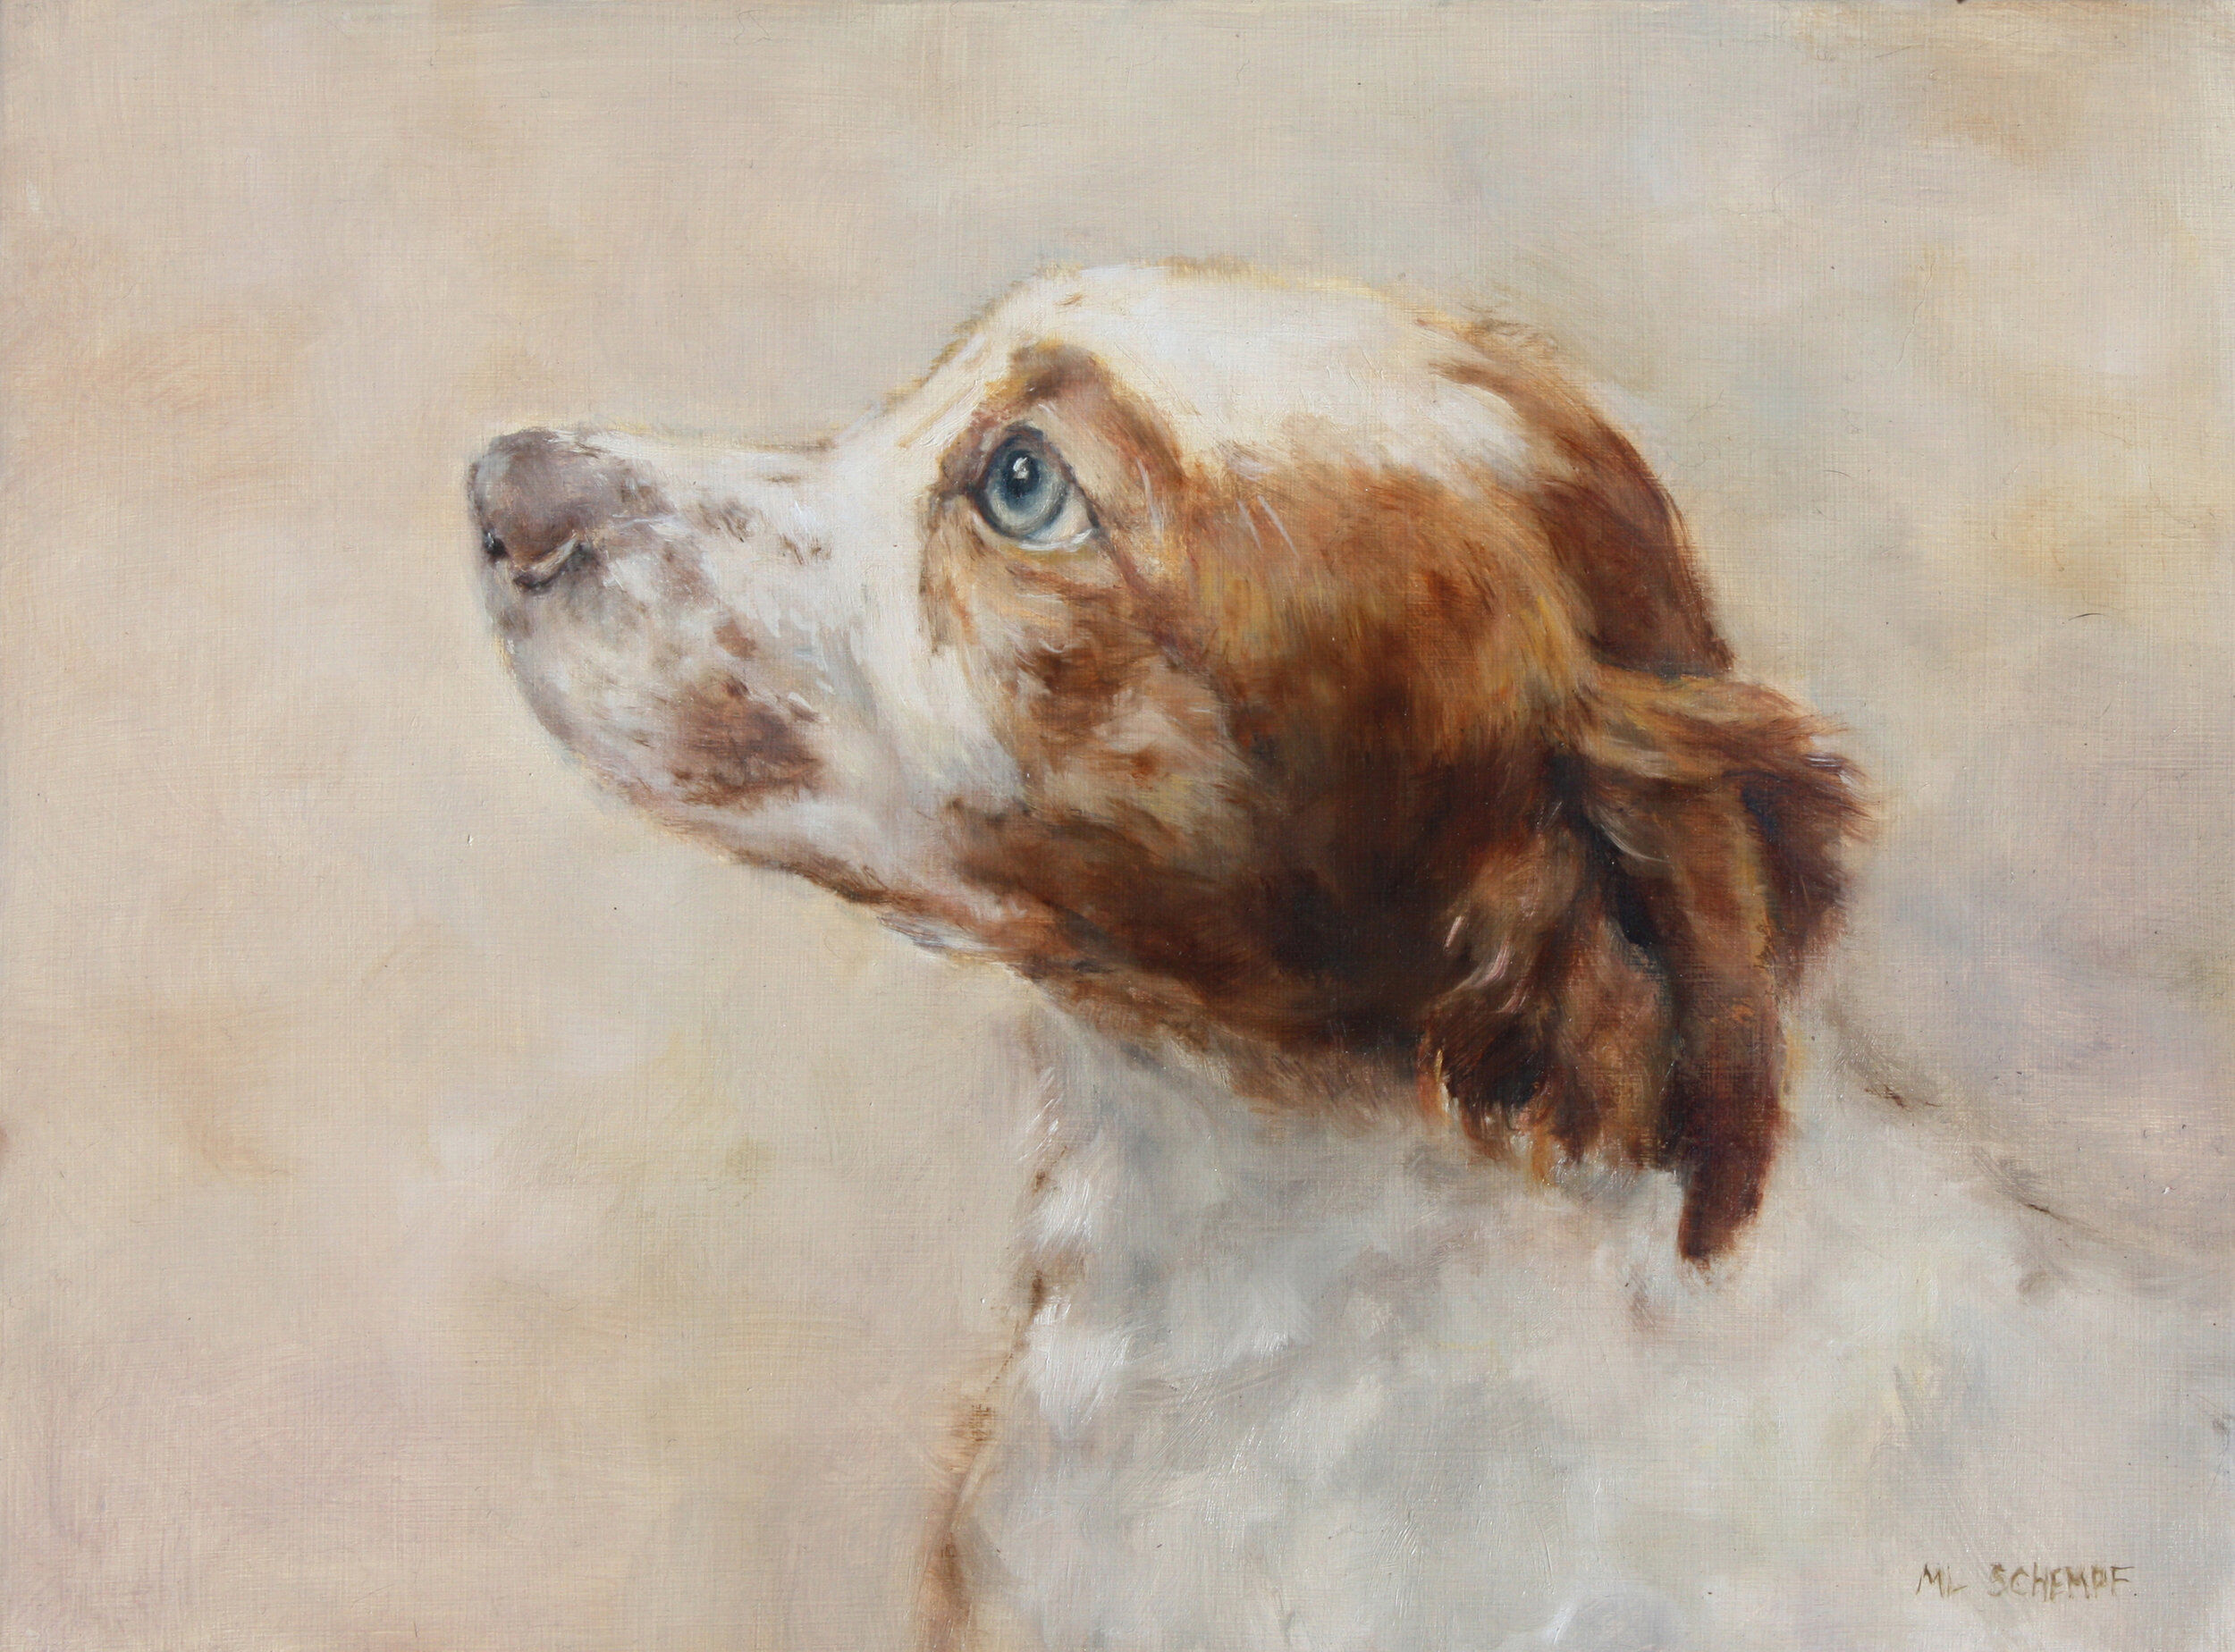  Mary Lou Schempf  Brittany Pup,  9” x 12”, oil on board  (available)  